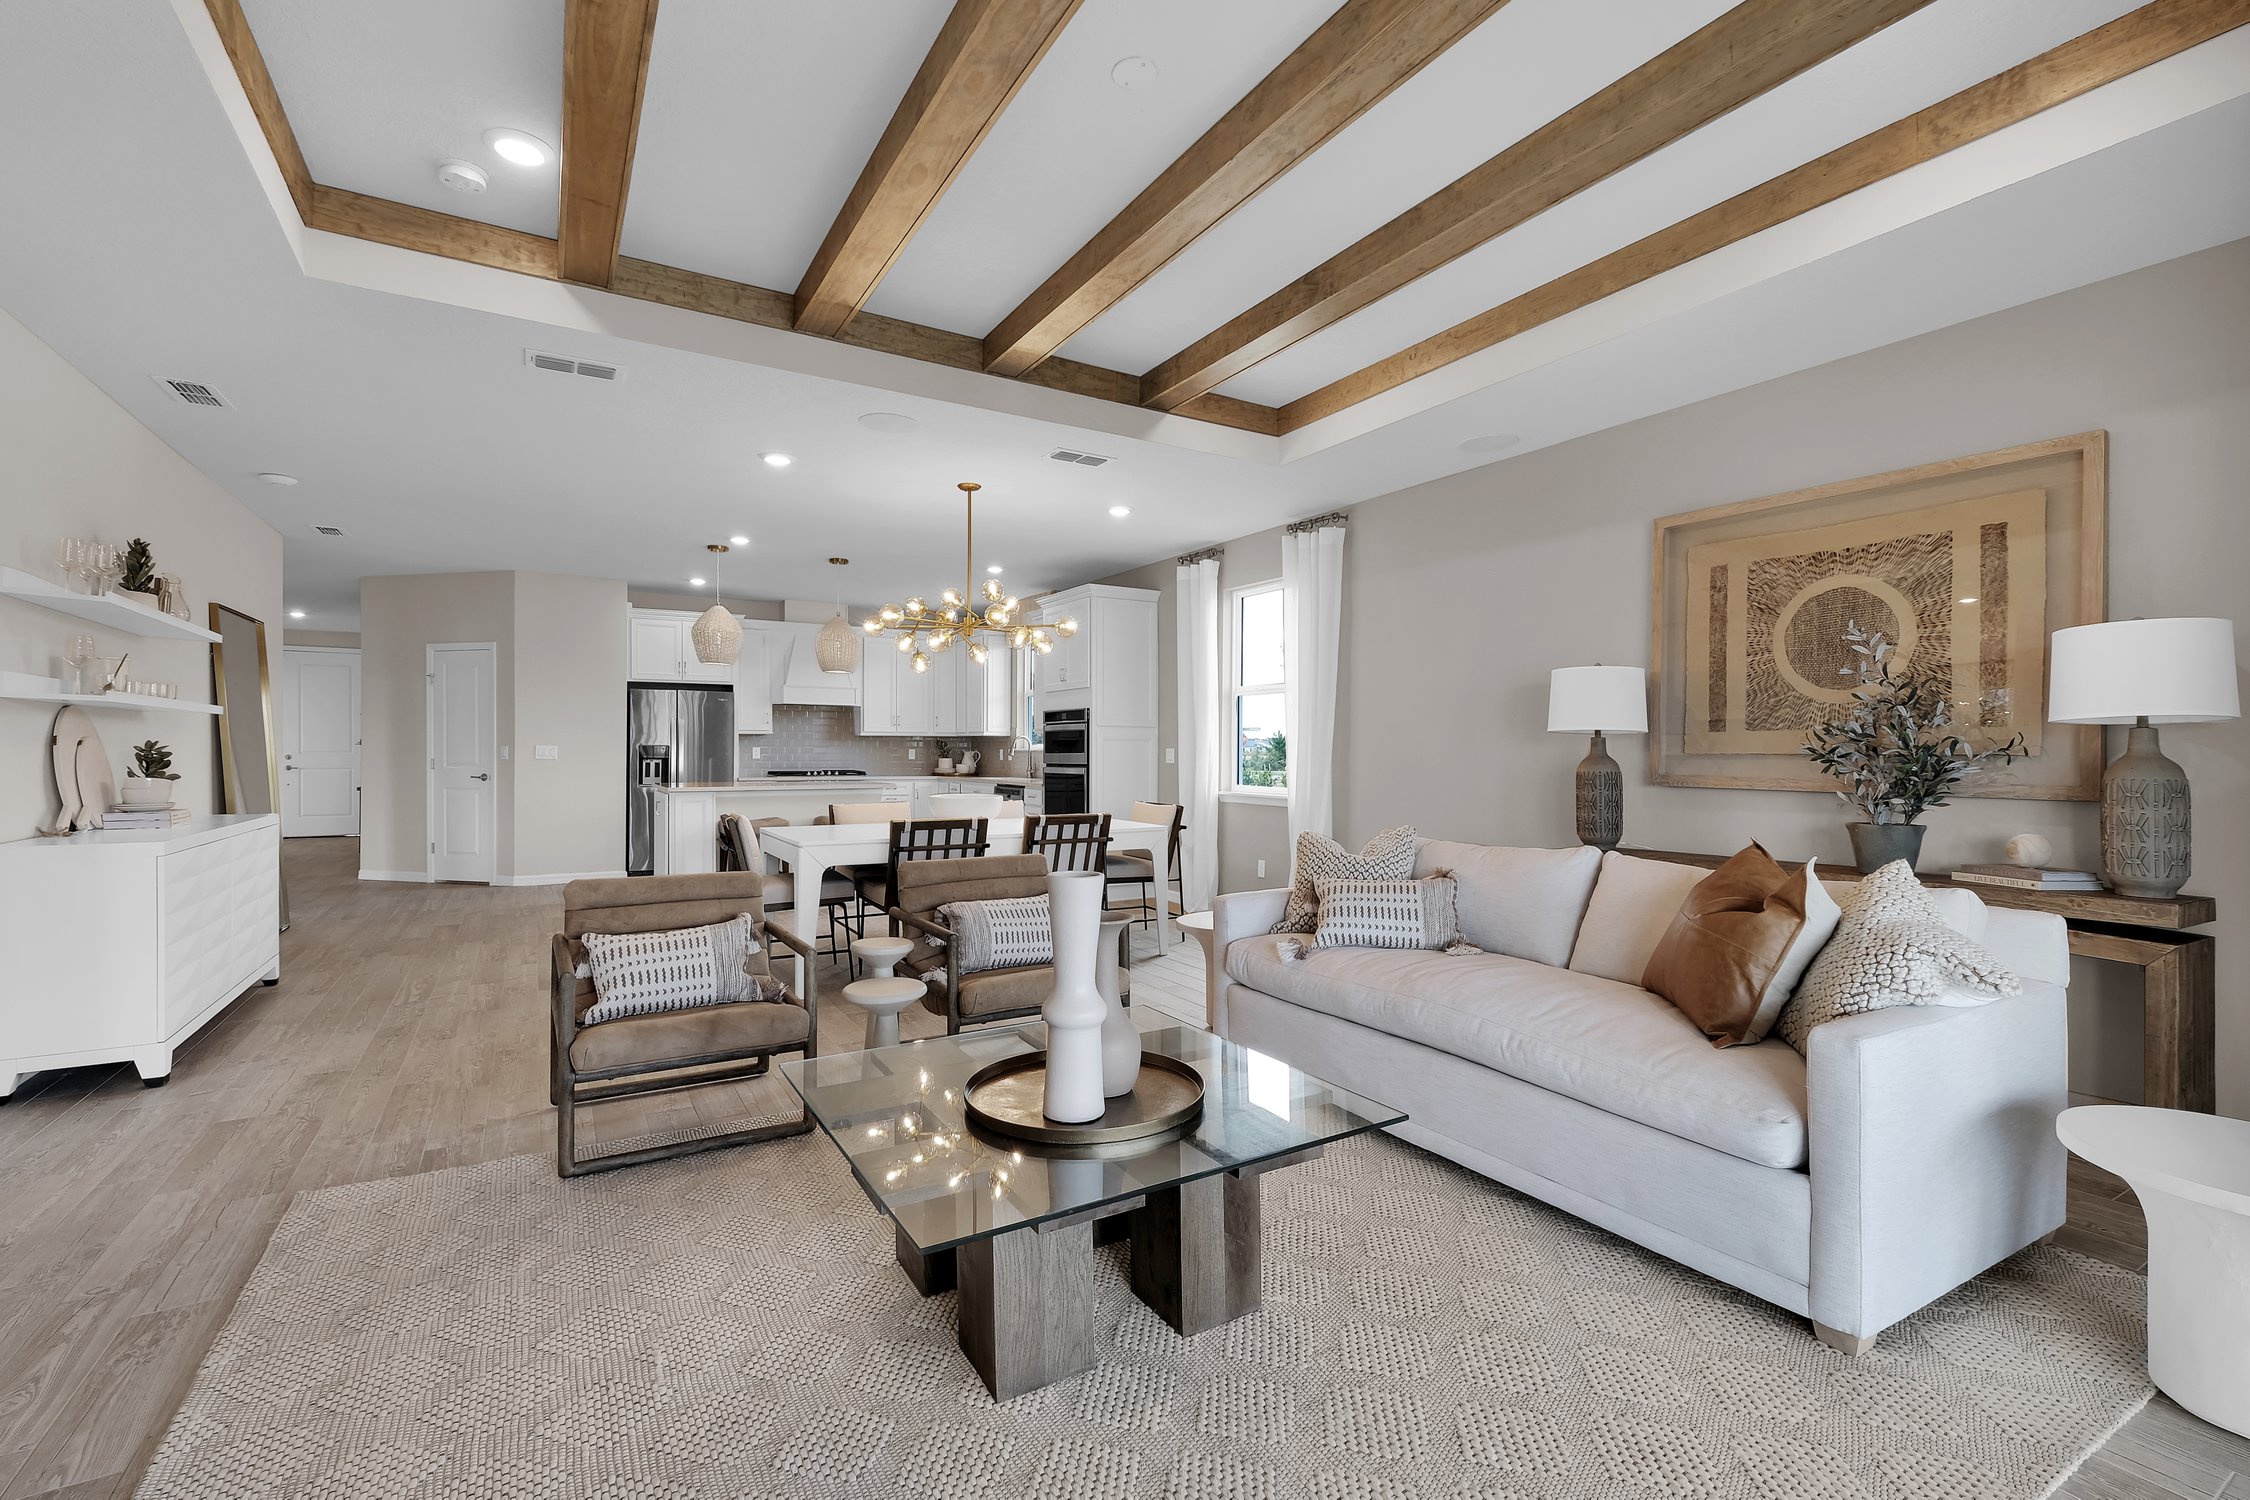 Pulte Homes Wildlight open concept living room and kitchen with five wood beams on the ceiling. Furniture is white and cream.